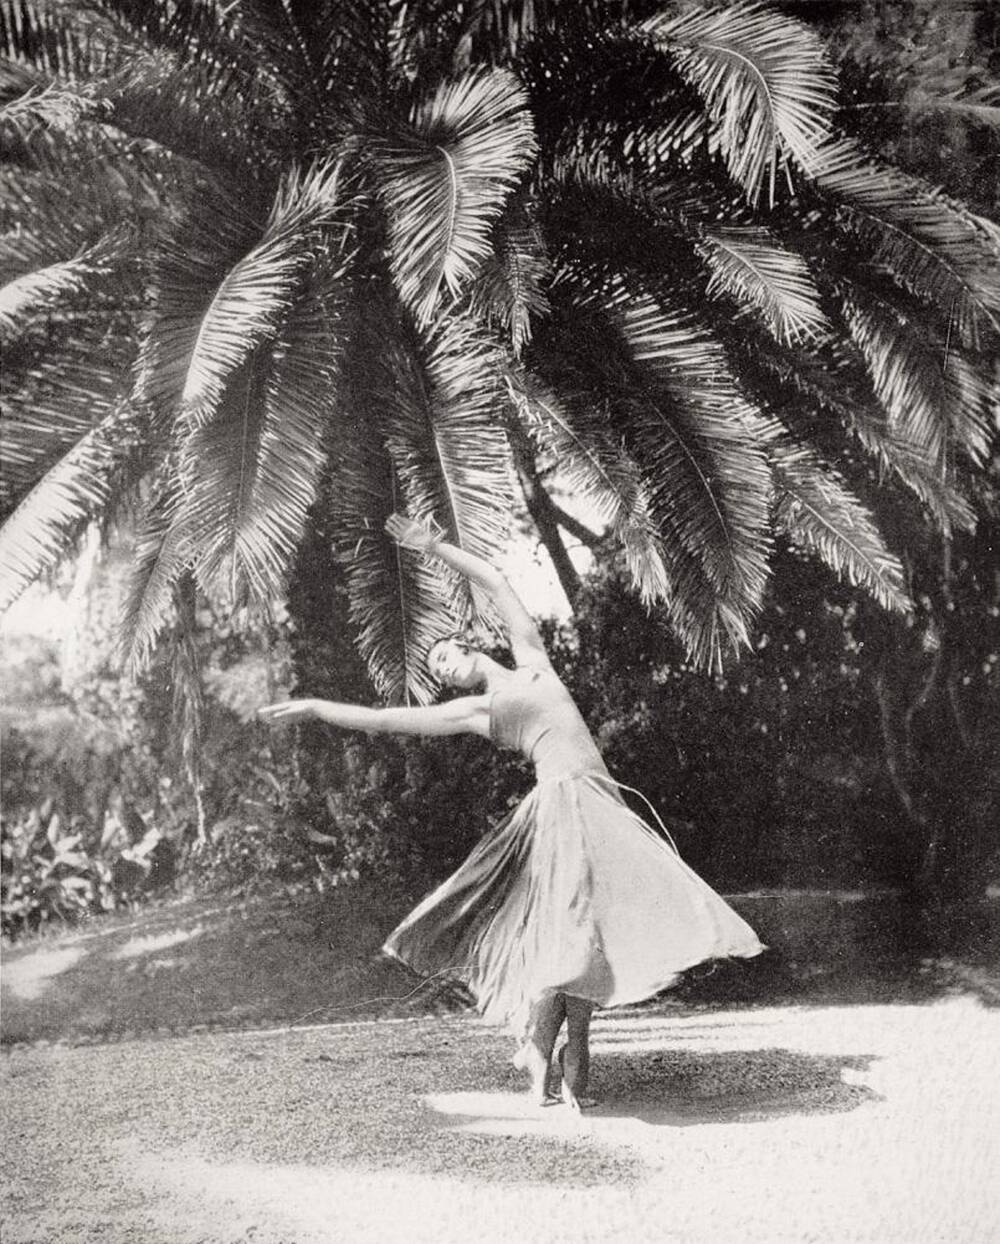 A black and white photo of a young woman, standing in a ballet pose beneath a large palm tree. She is en pointe, and her arms are held stretched above her head. She wears a floaty skirt.